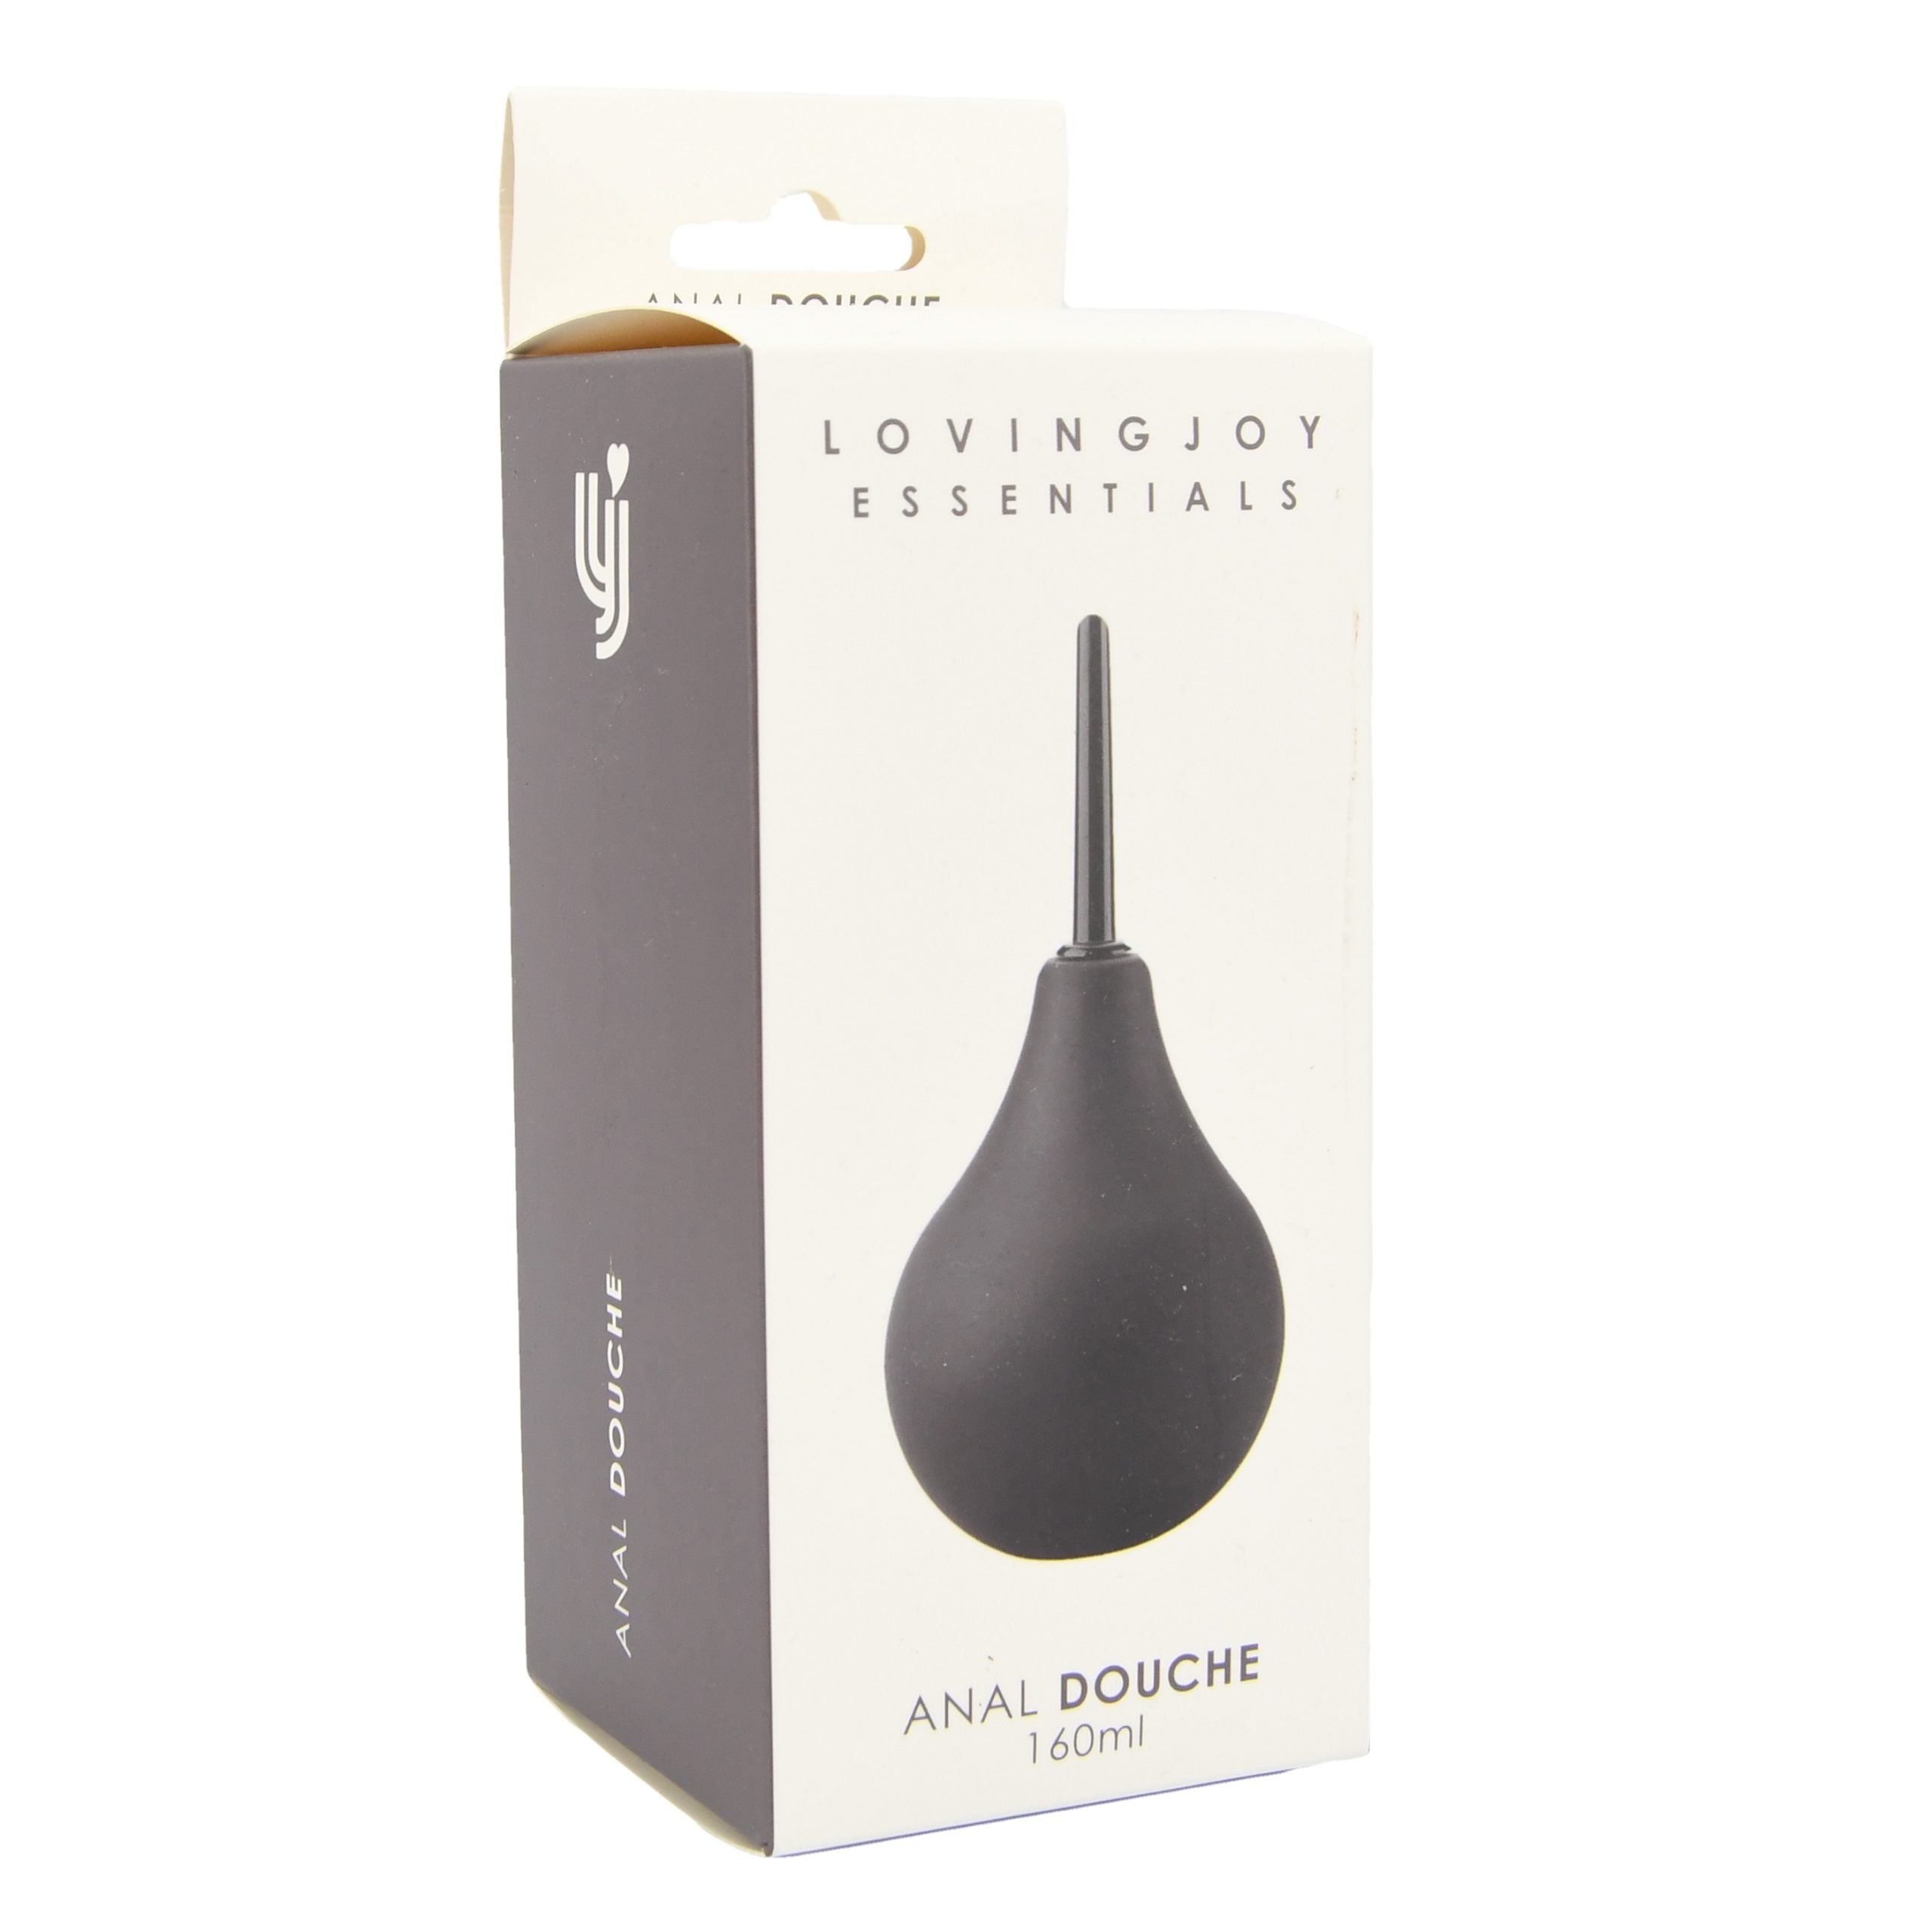 Vibrators, Sex Toy Kits and Sex Toys at Cloud9Adults - Loving Joy Anal Douche 160ml - Buy Sex Toys Online